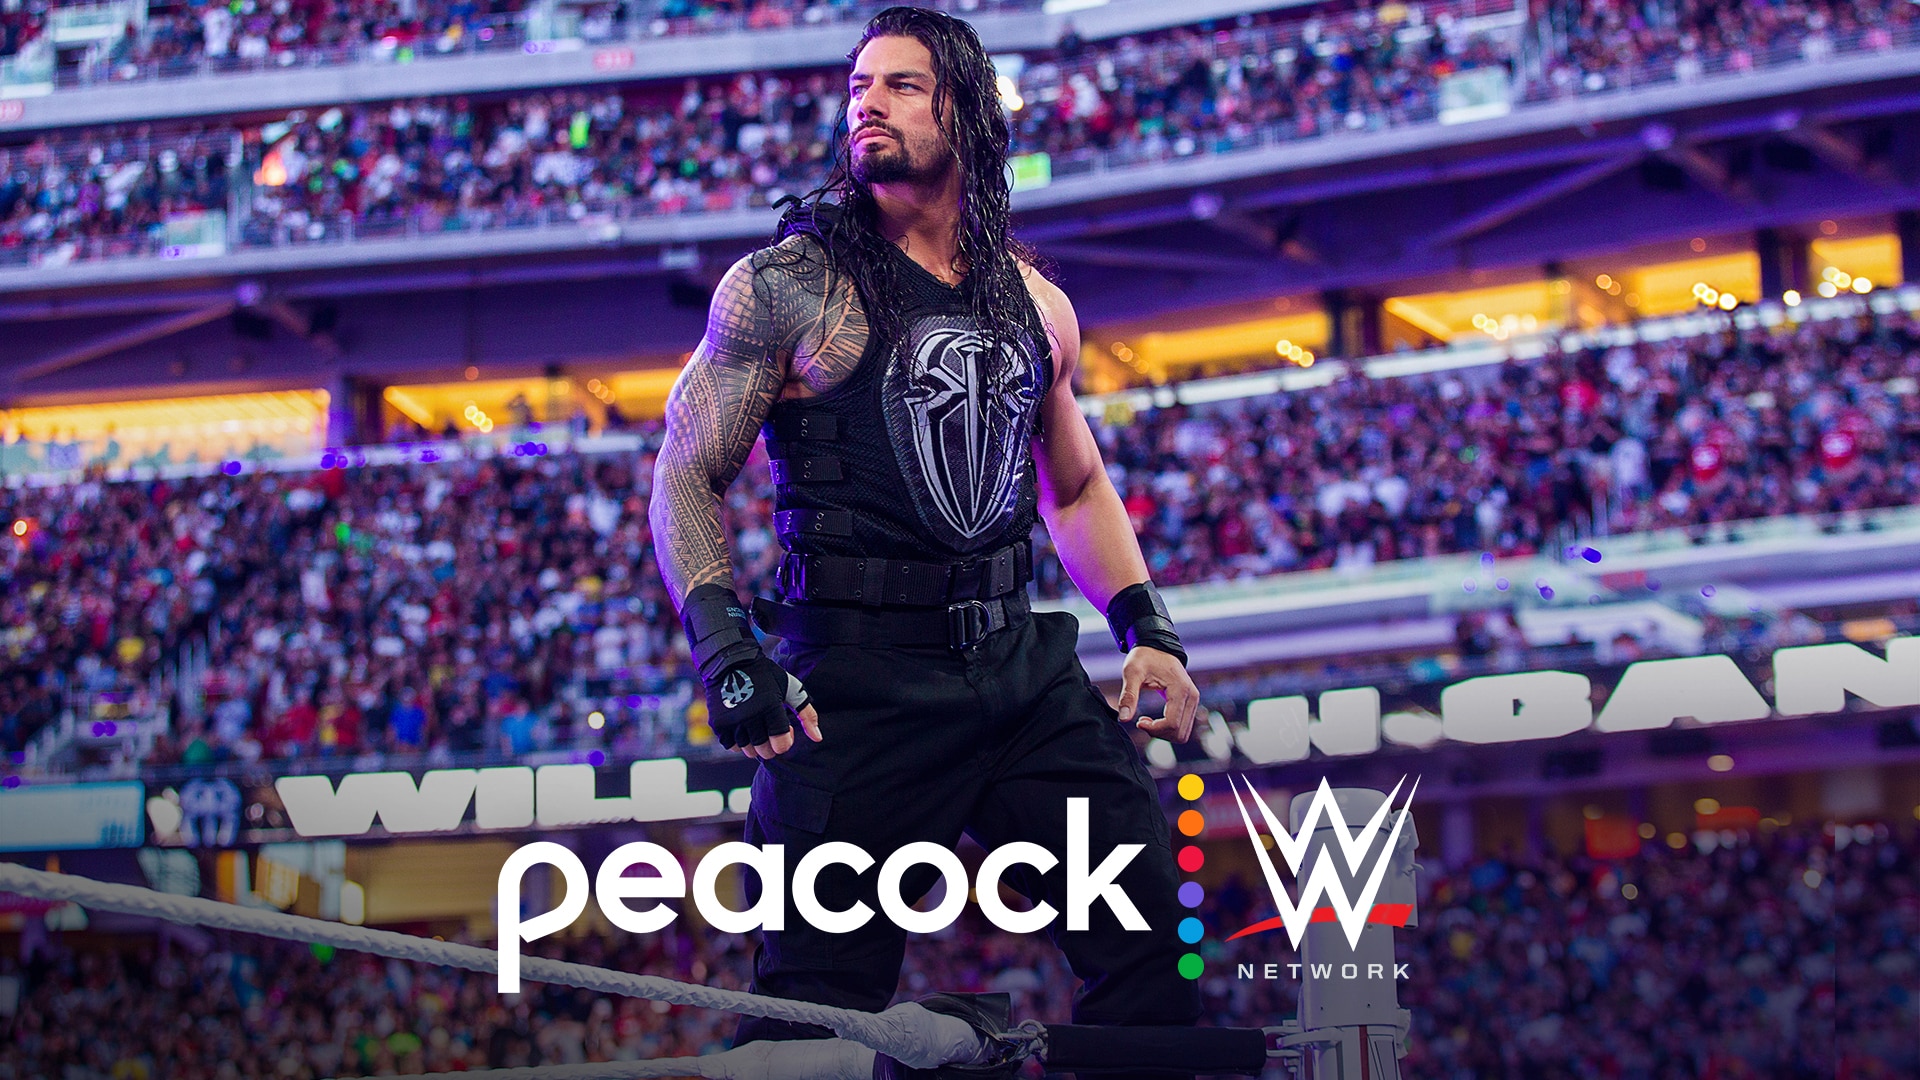 is biography wwe legends on peacock